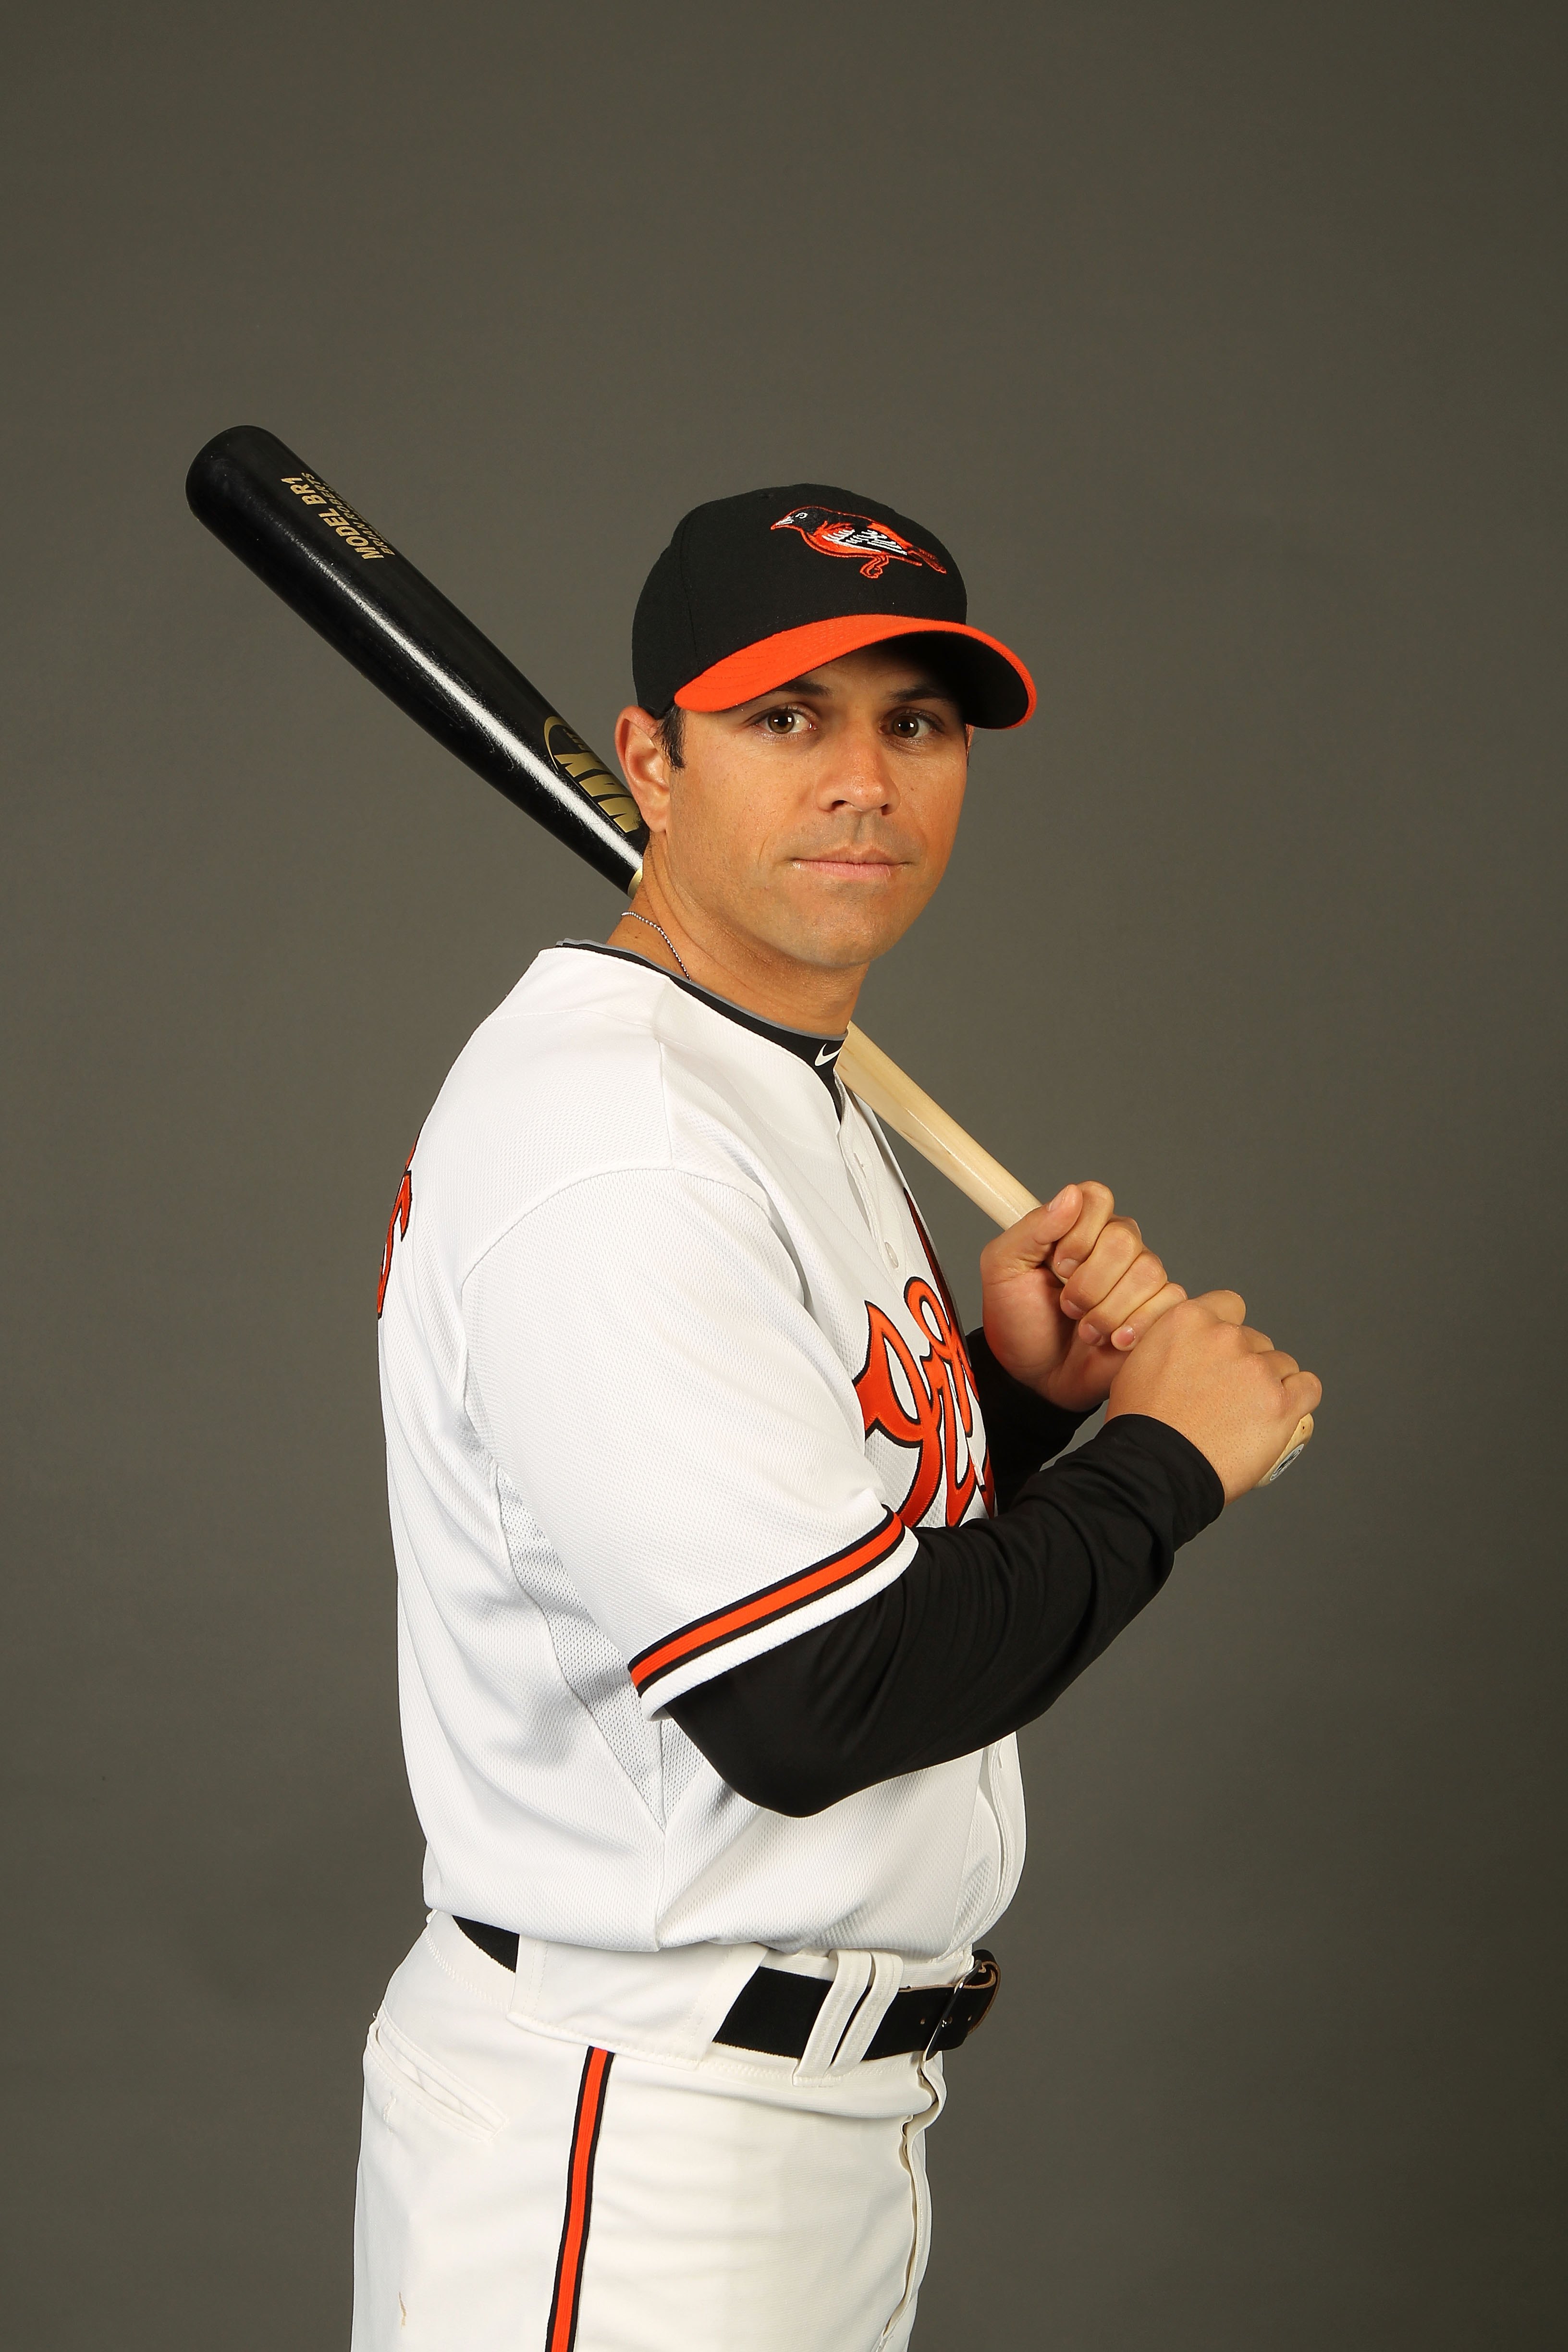 SARASOTA, FL - FEBRUARY 27:  Brian Roberts #1 of the Baltimore Orioles poses for a photo during Spring Training Media Photo Day at Ed Smith Stadium  on February 27, 2010 in Sarasota, Florida.  (Photo by Nick Laham/Getty Images)